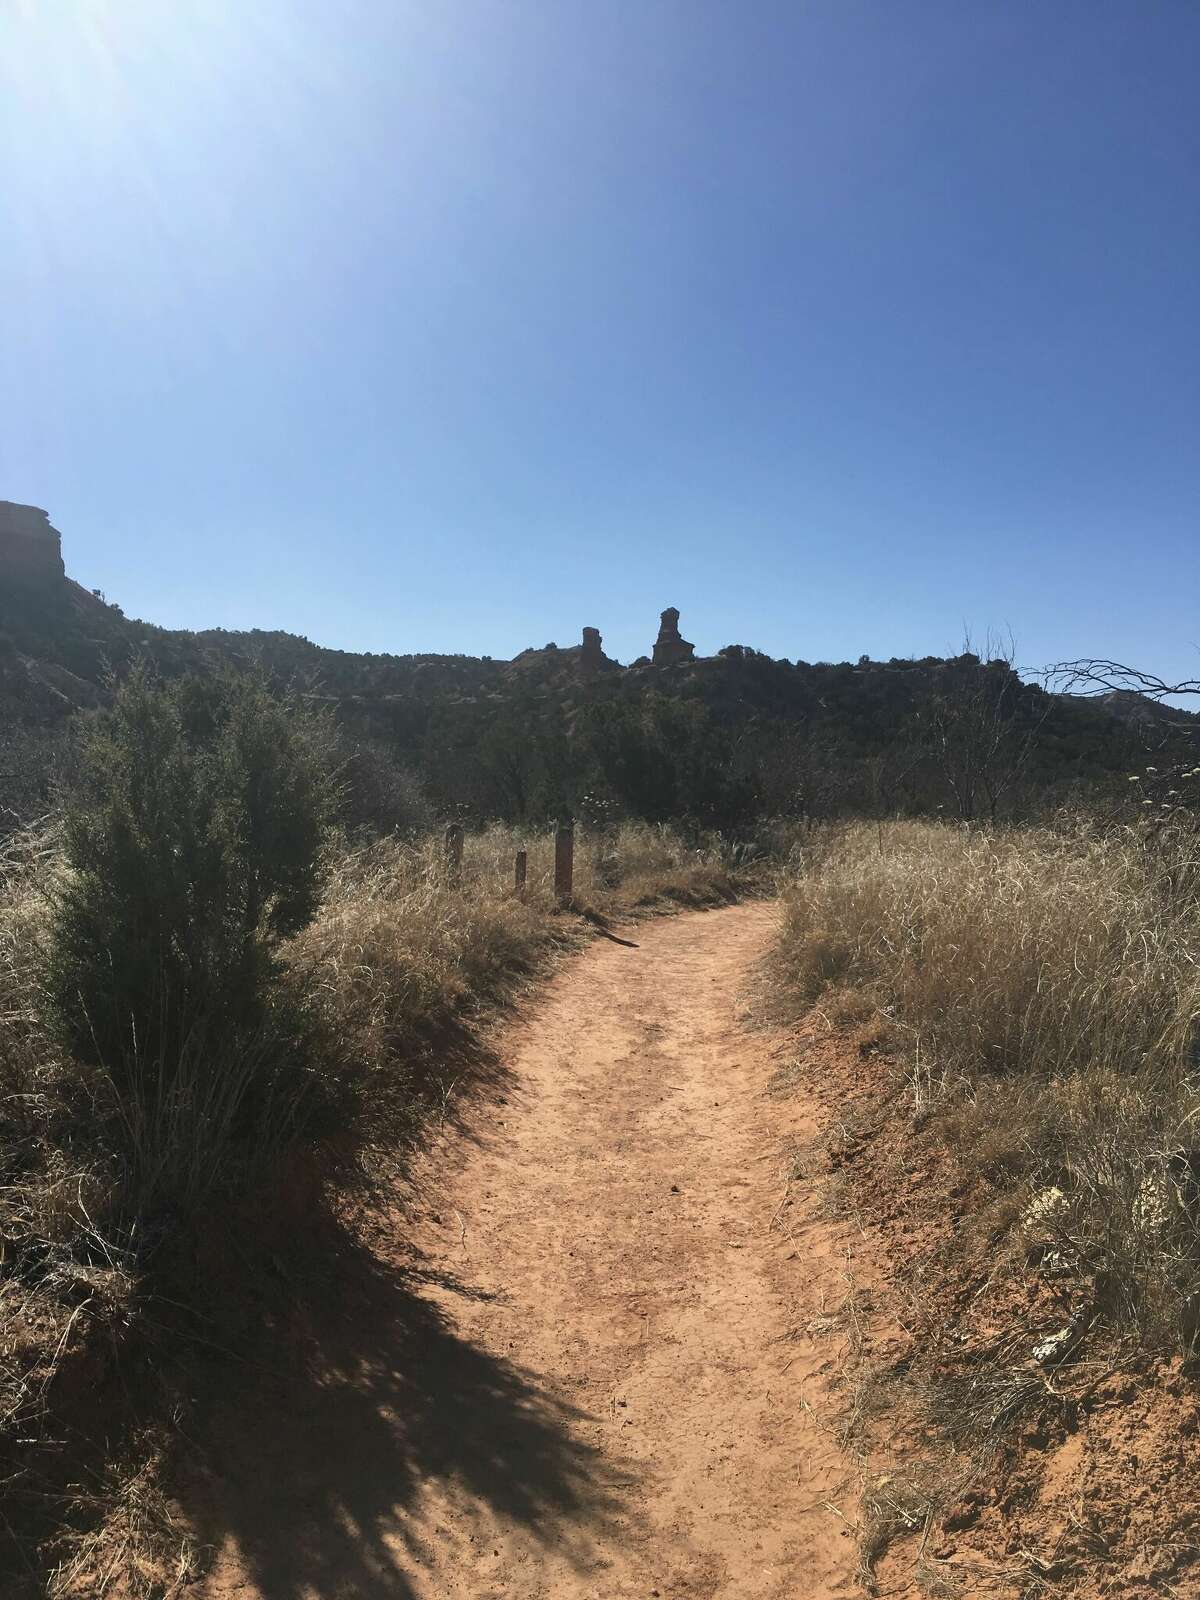 The Lighthouse trail in Canyon, Texas, is one of the top-rated hiking areas in the U.S. on Google Maps, according to a Google newsletter. 